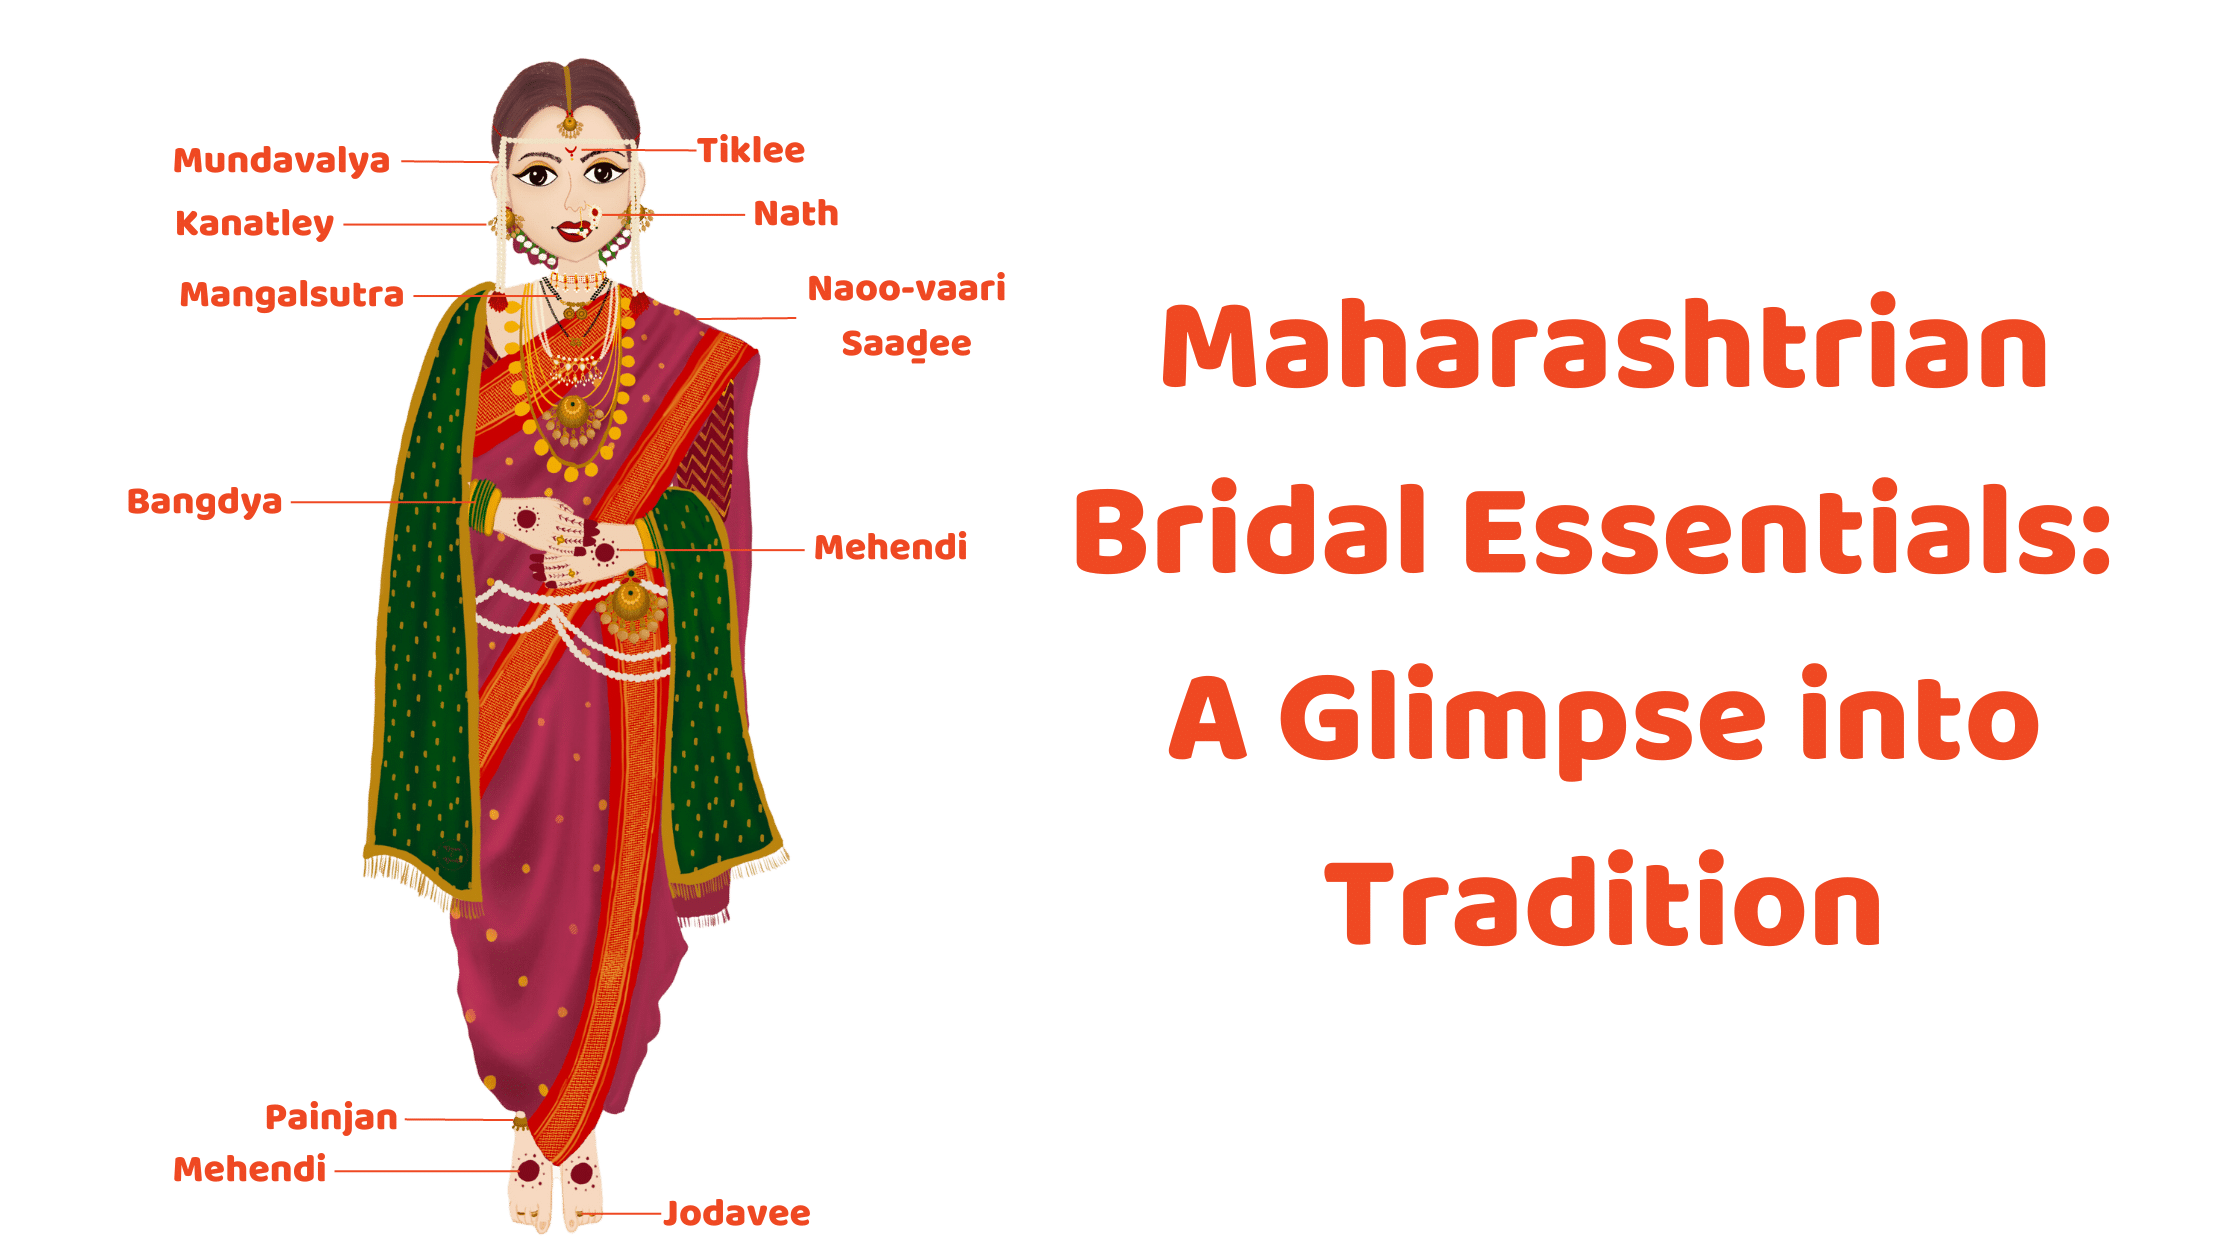 10 Essential Ornaments for a Marathi Bride Maharashtrian Bridal Essentials: A Glimpse into Tradition Illustration of an Indian bride with a description of each wedding ornament.